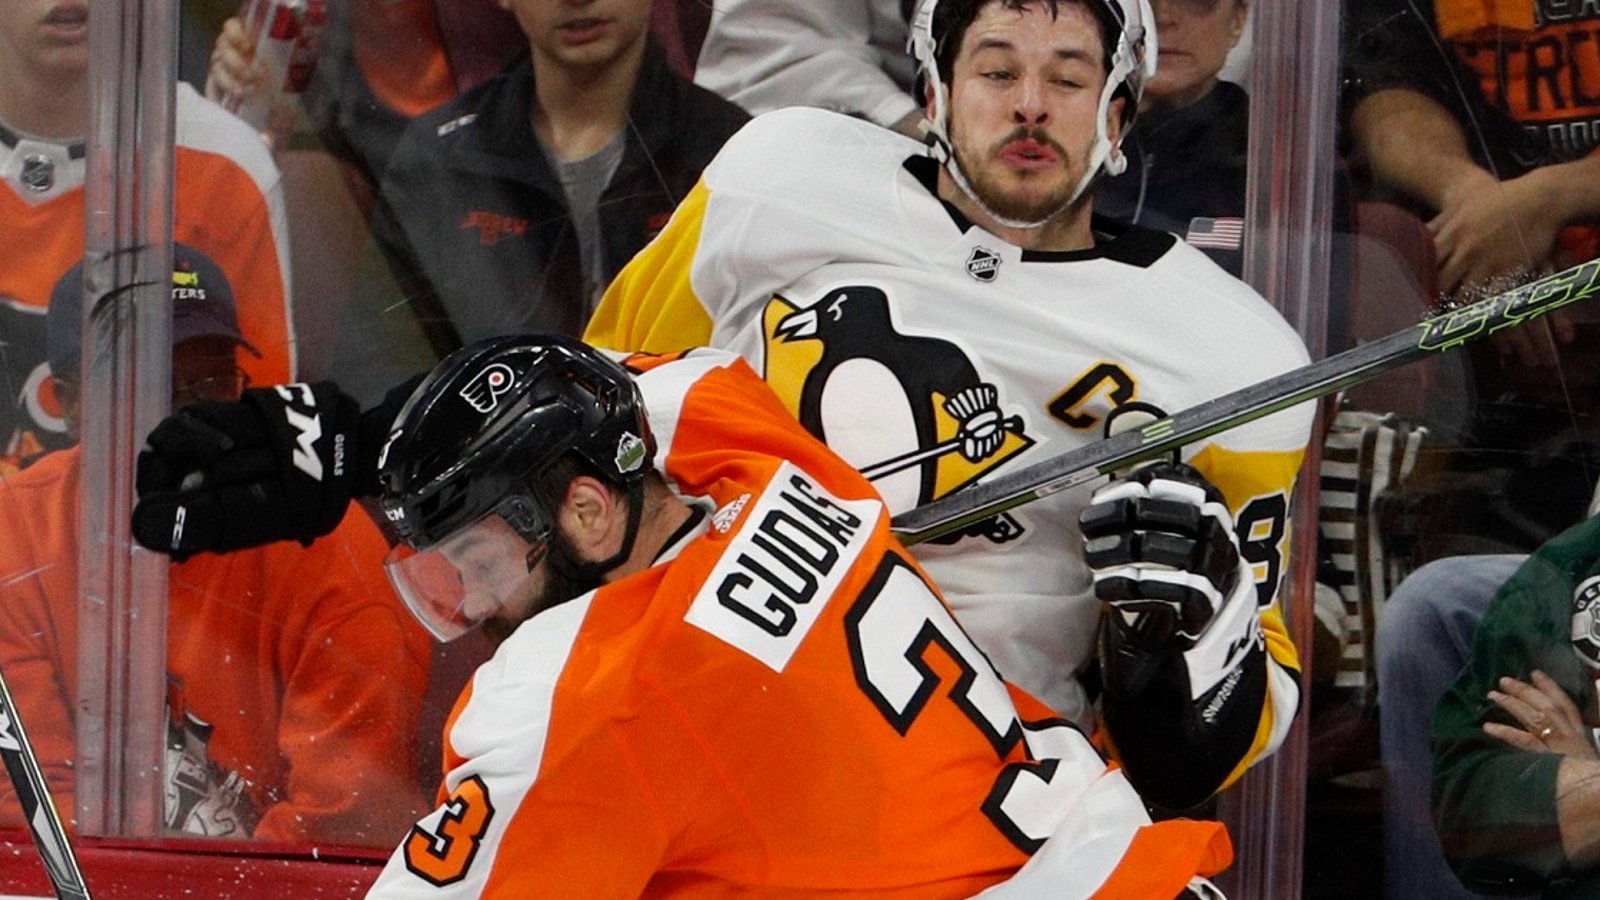 Gudas levels Crosby and then gives him a little something extra.